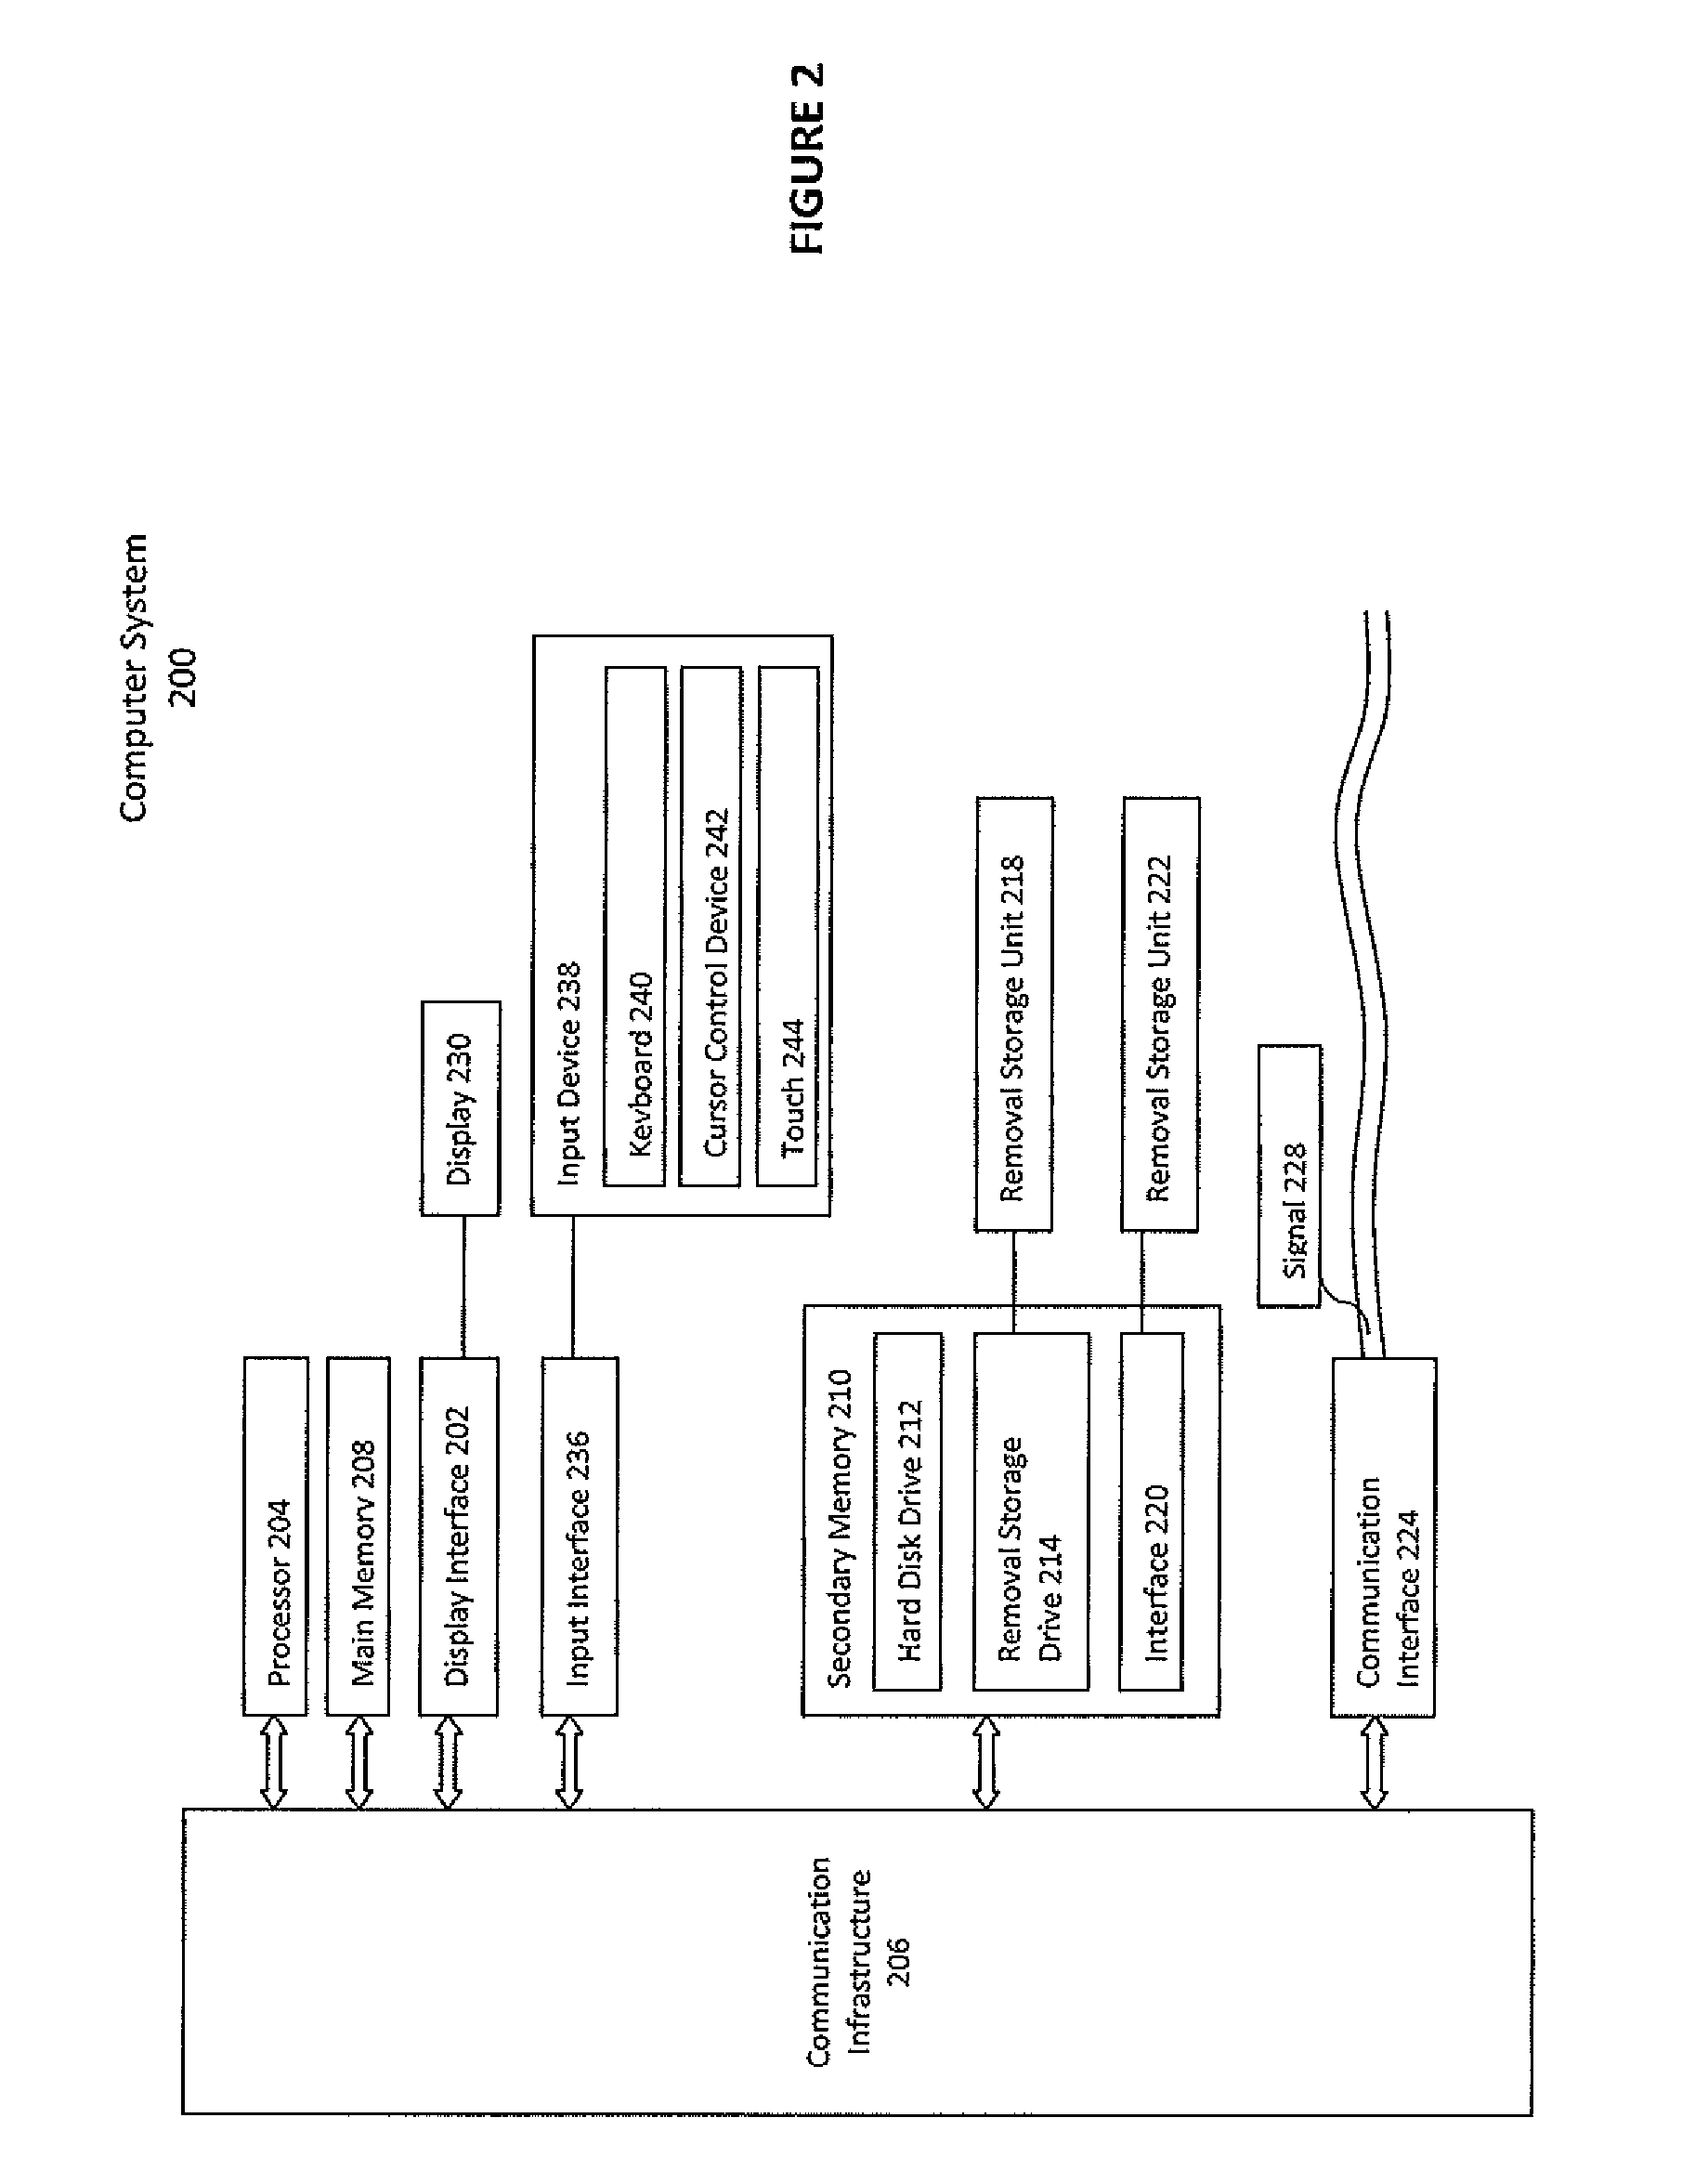 System and methods for an electronic computer-implemented portal for obtaining and offer services